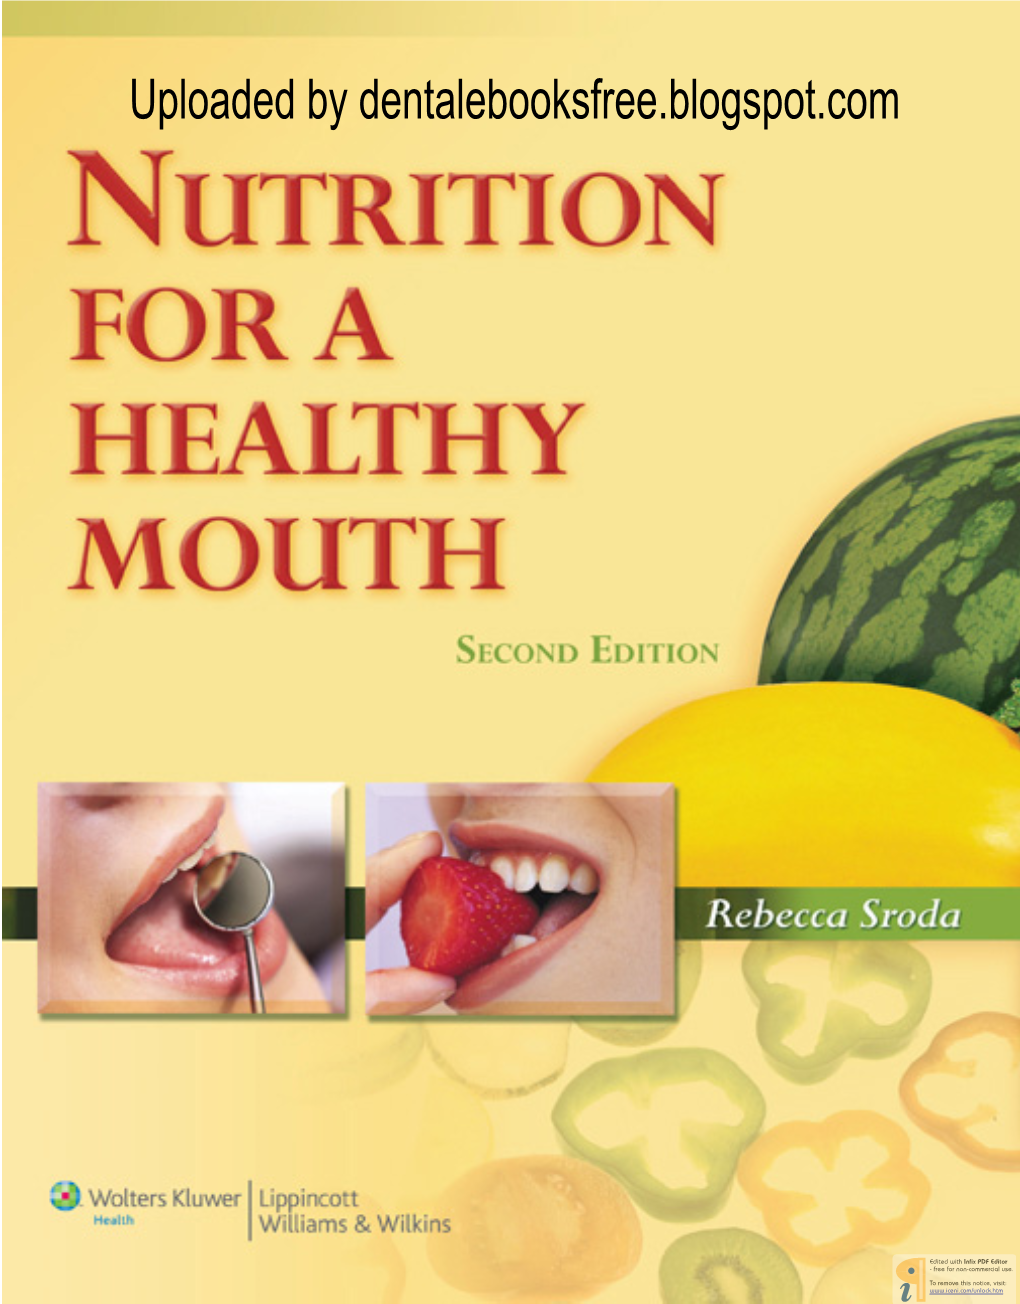 Nutrition for a Healthy Mouth / Rebecca Sroda.—2Nd Ed